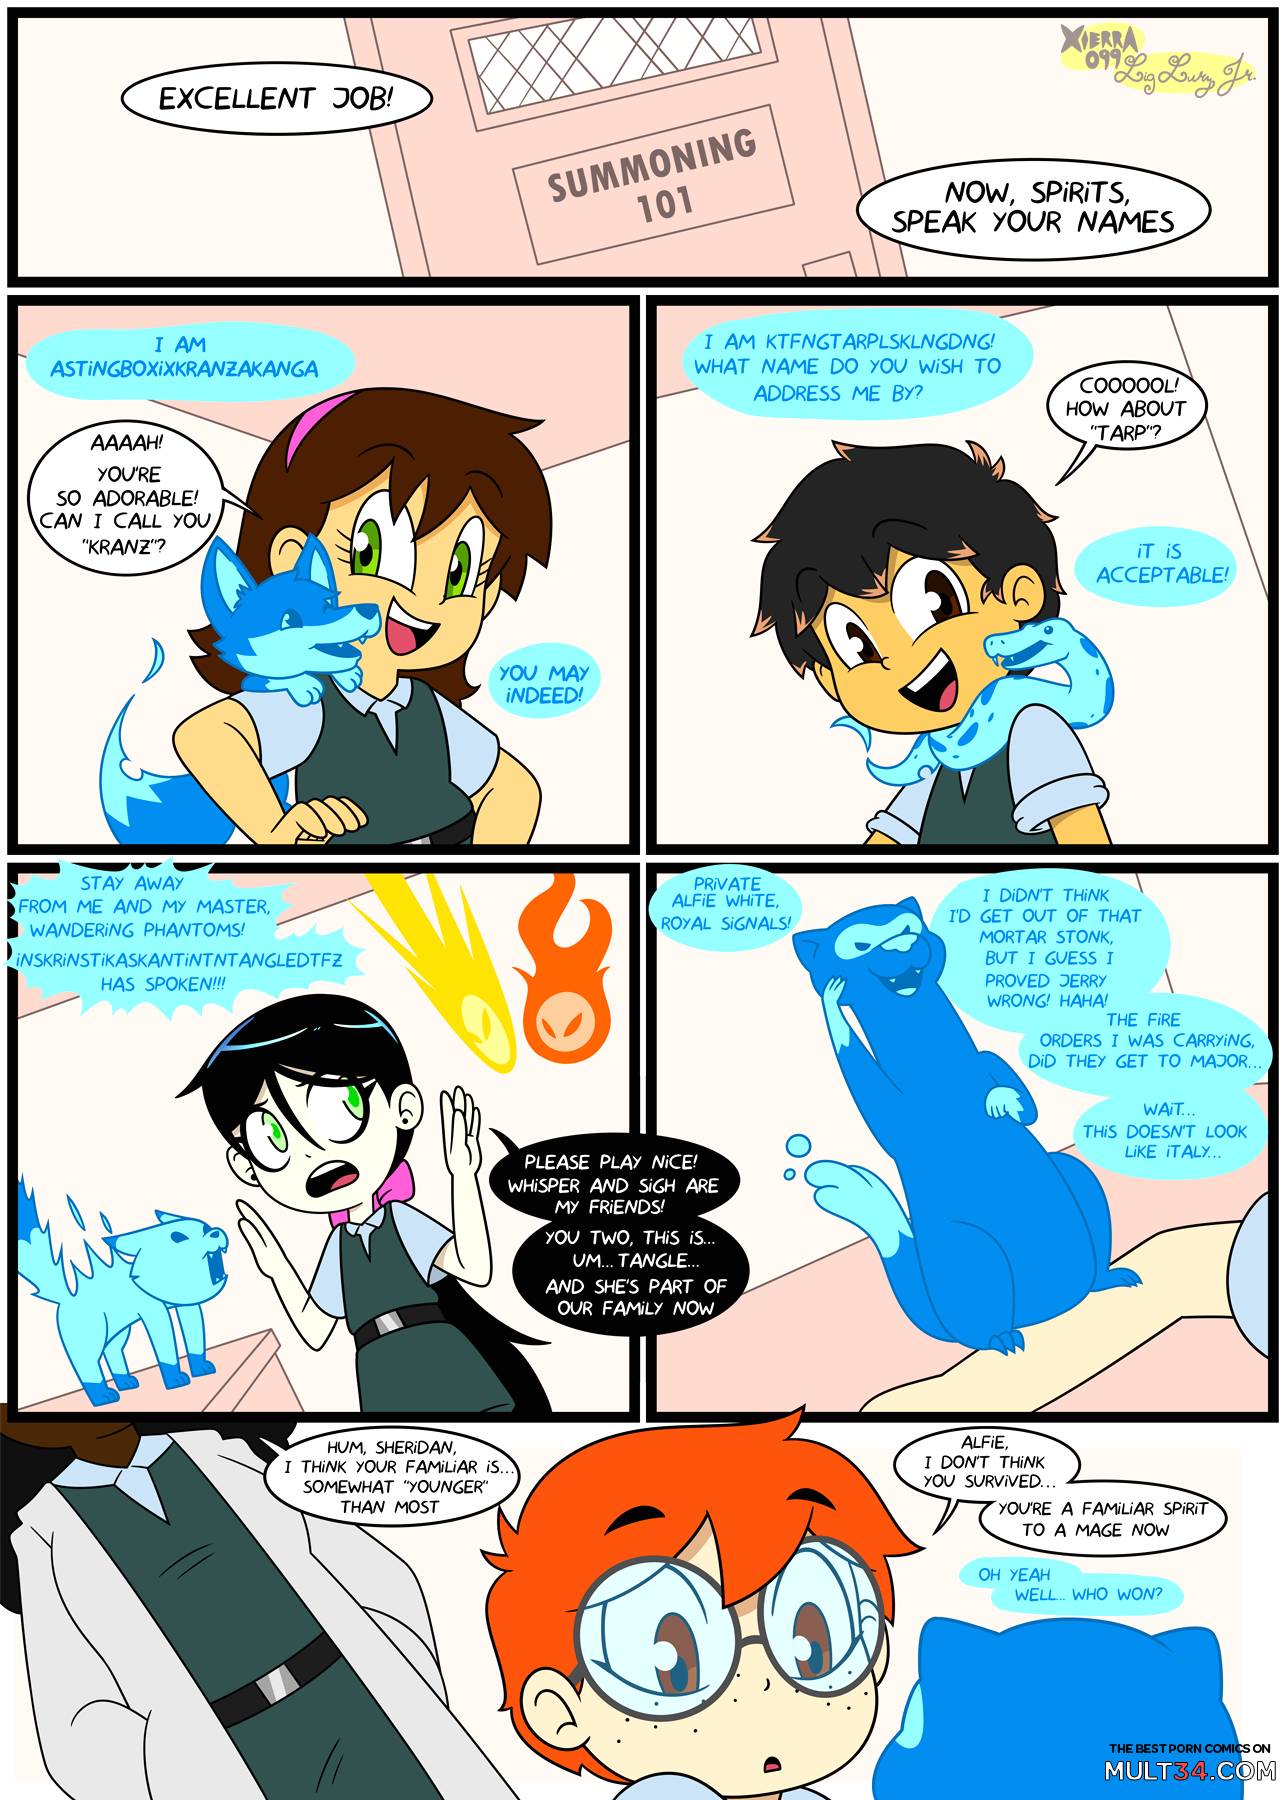 St. Heretic's Academia page 6